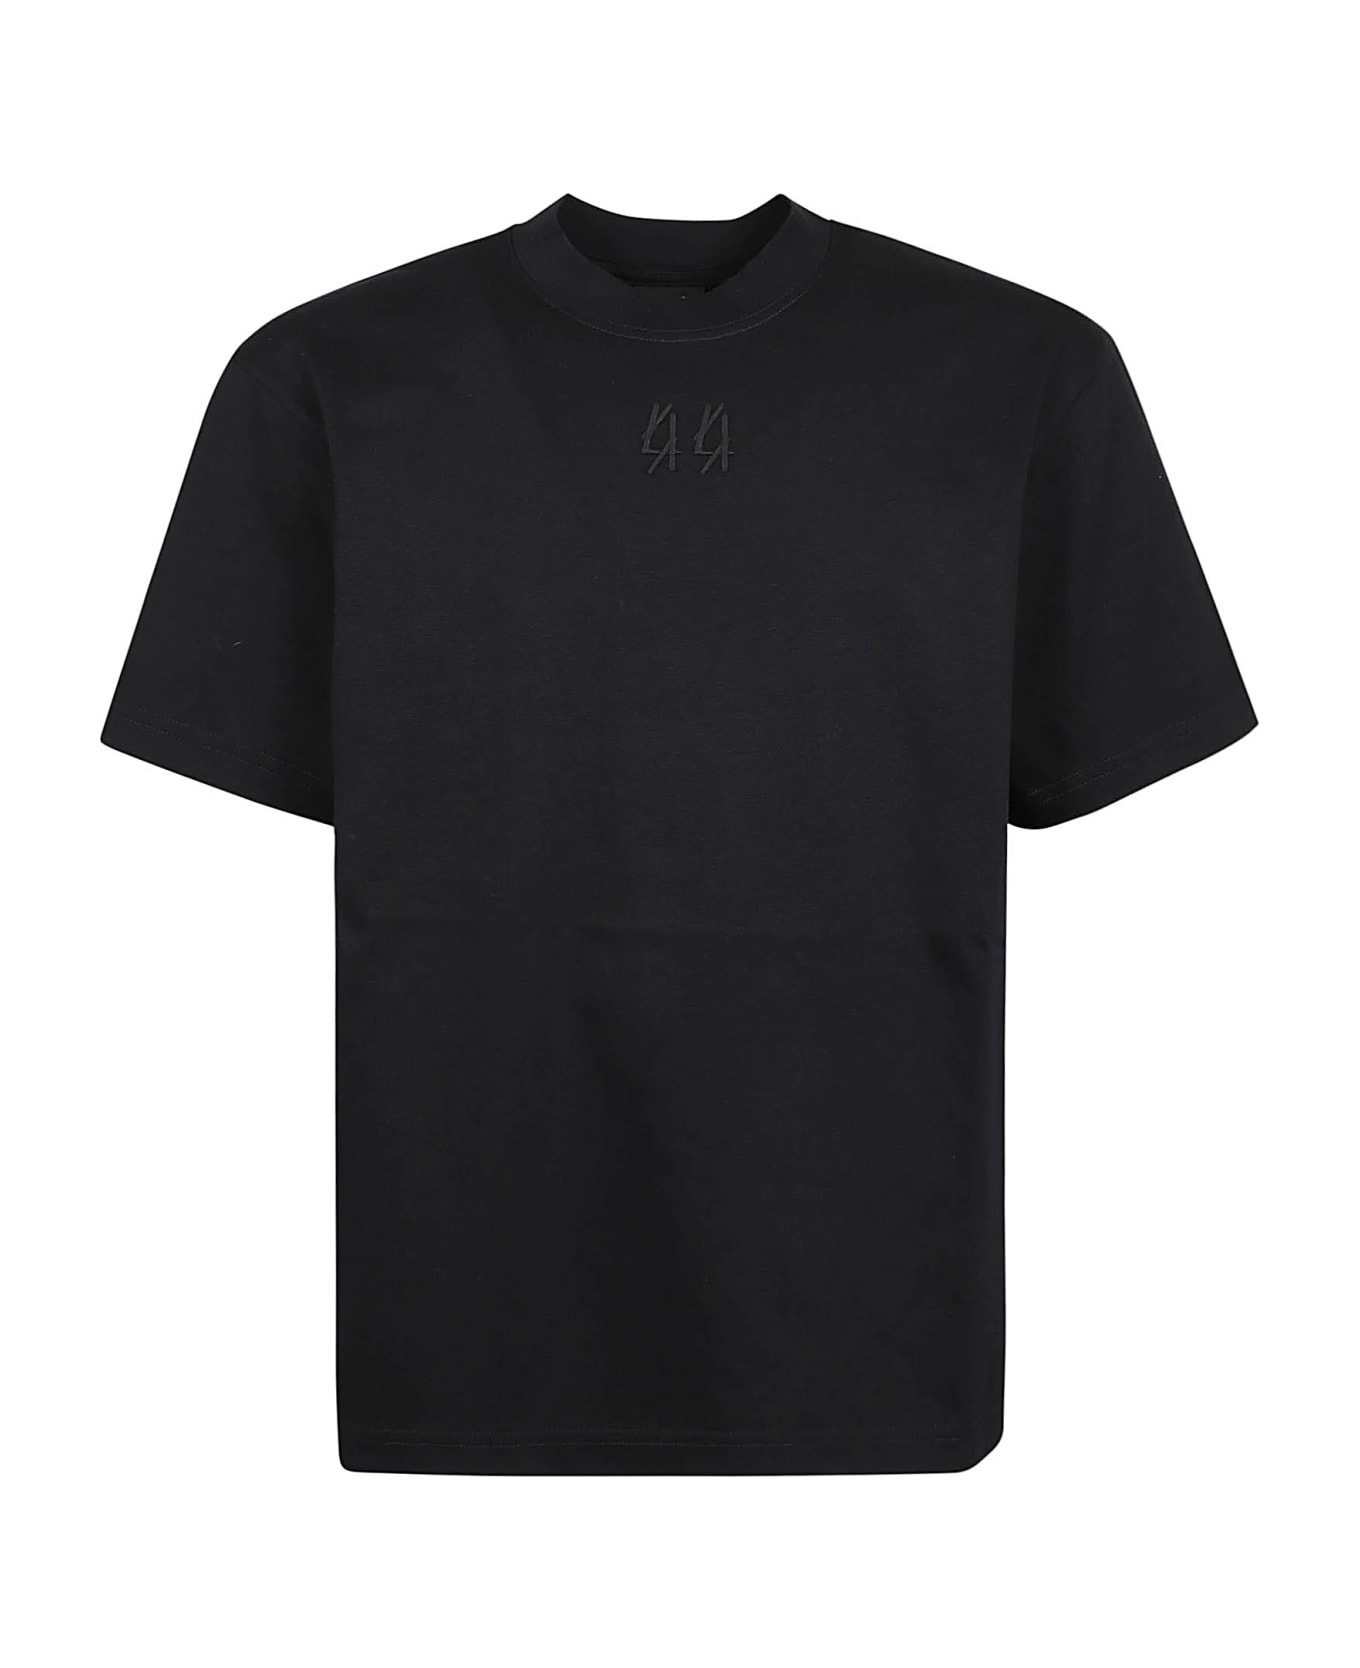 44 Label Group Classic Tee - Black The Enemy Print シャツ